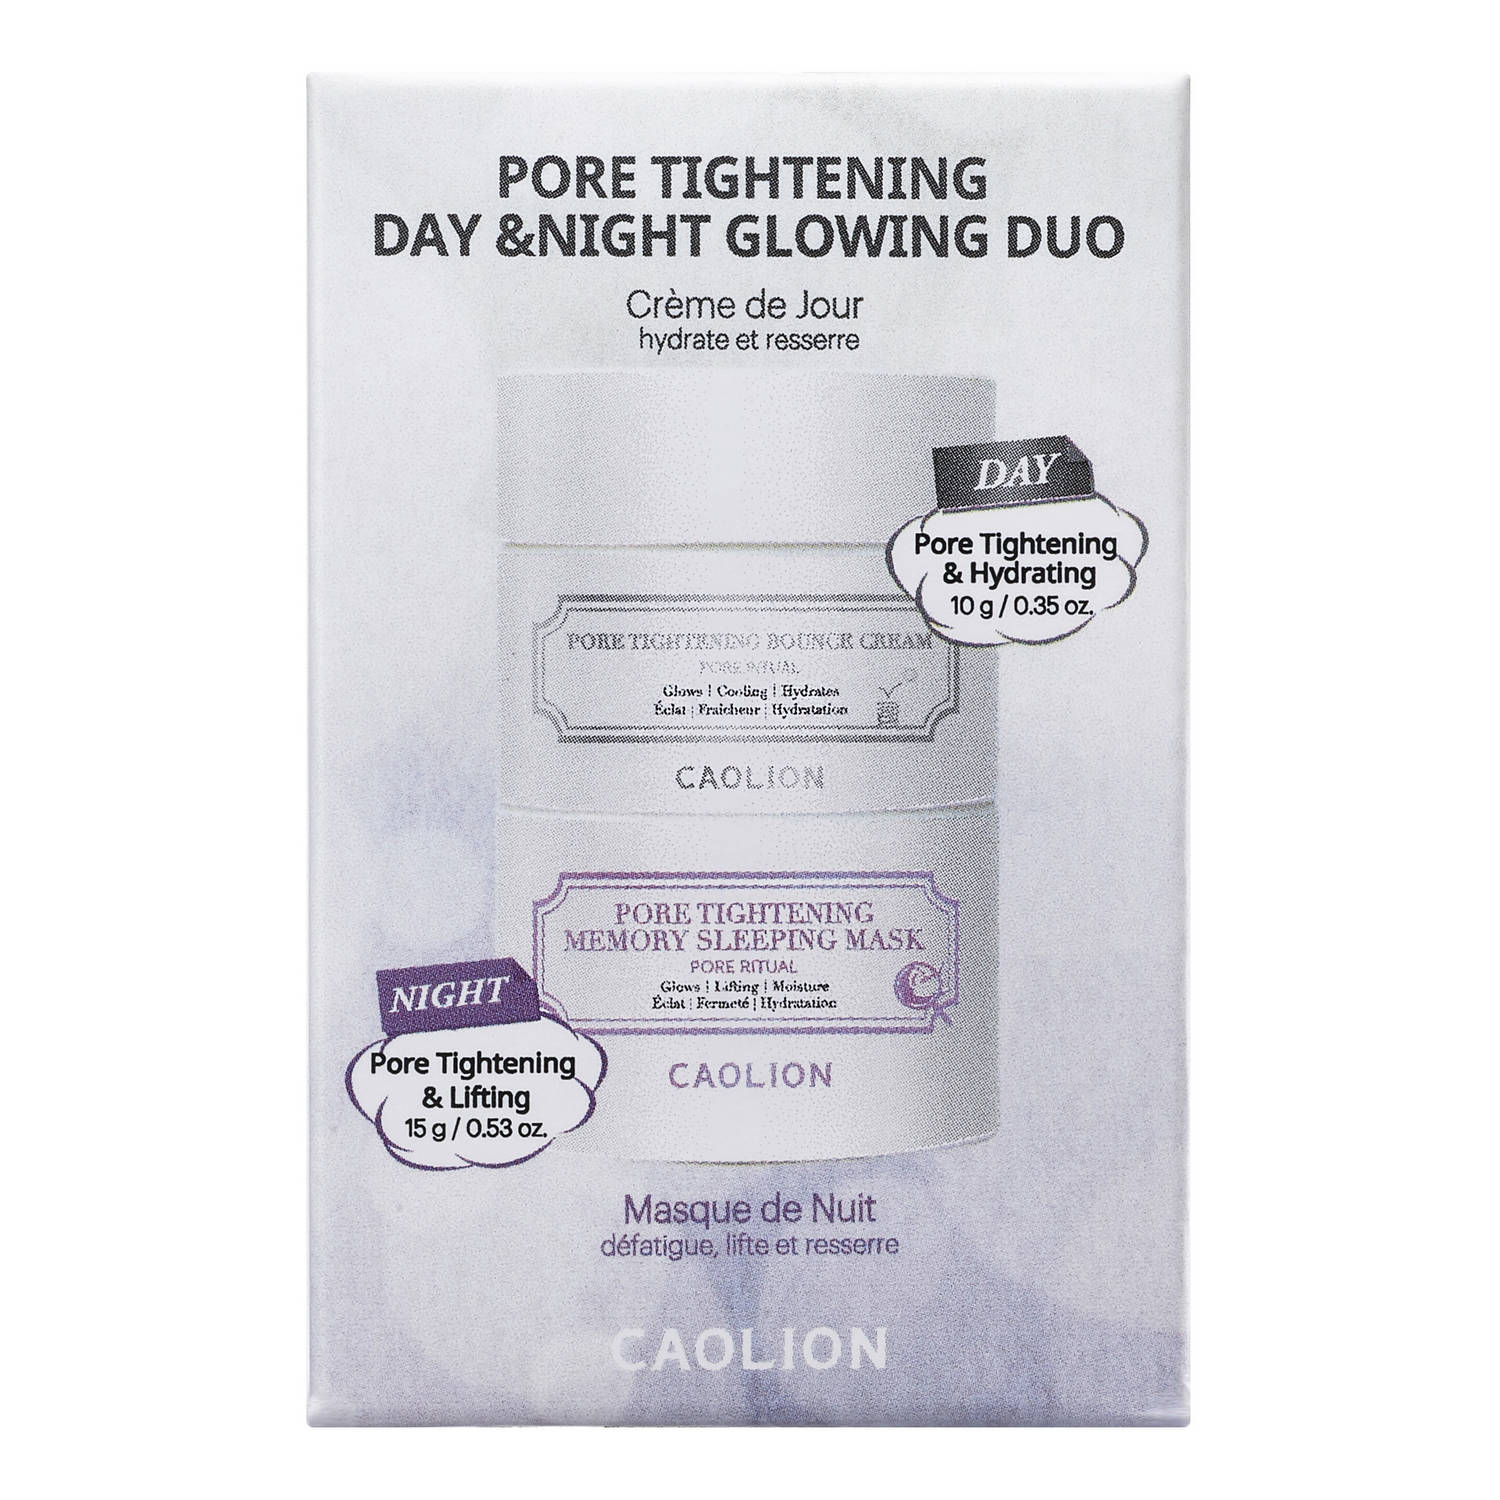 caolion pore tightening day & night glowing duo review